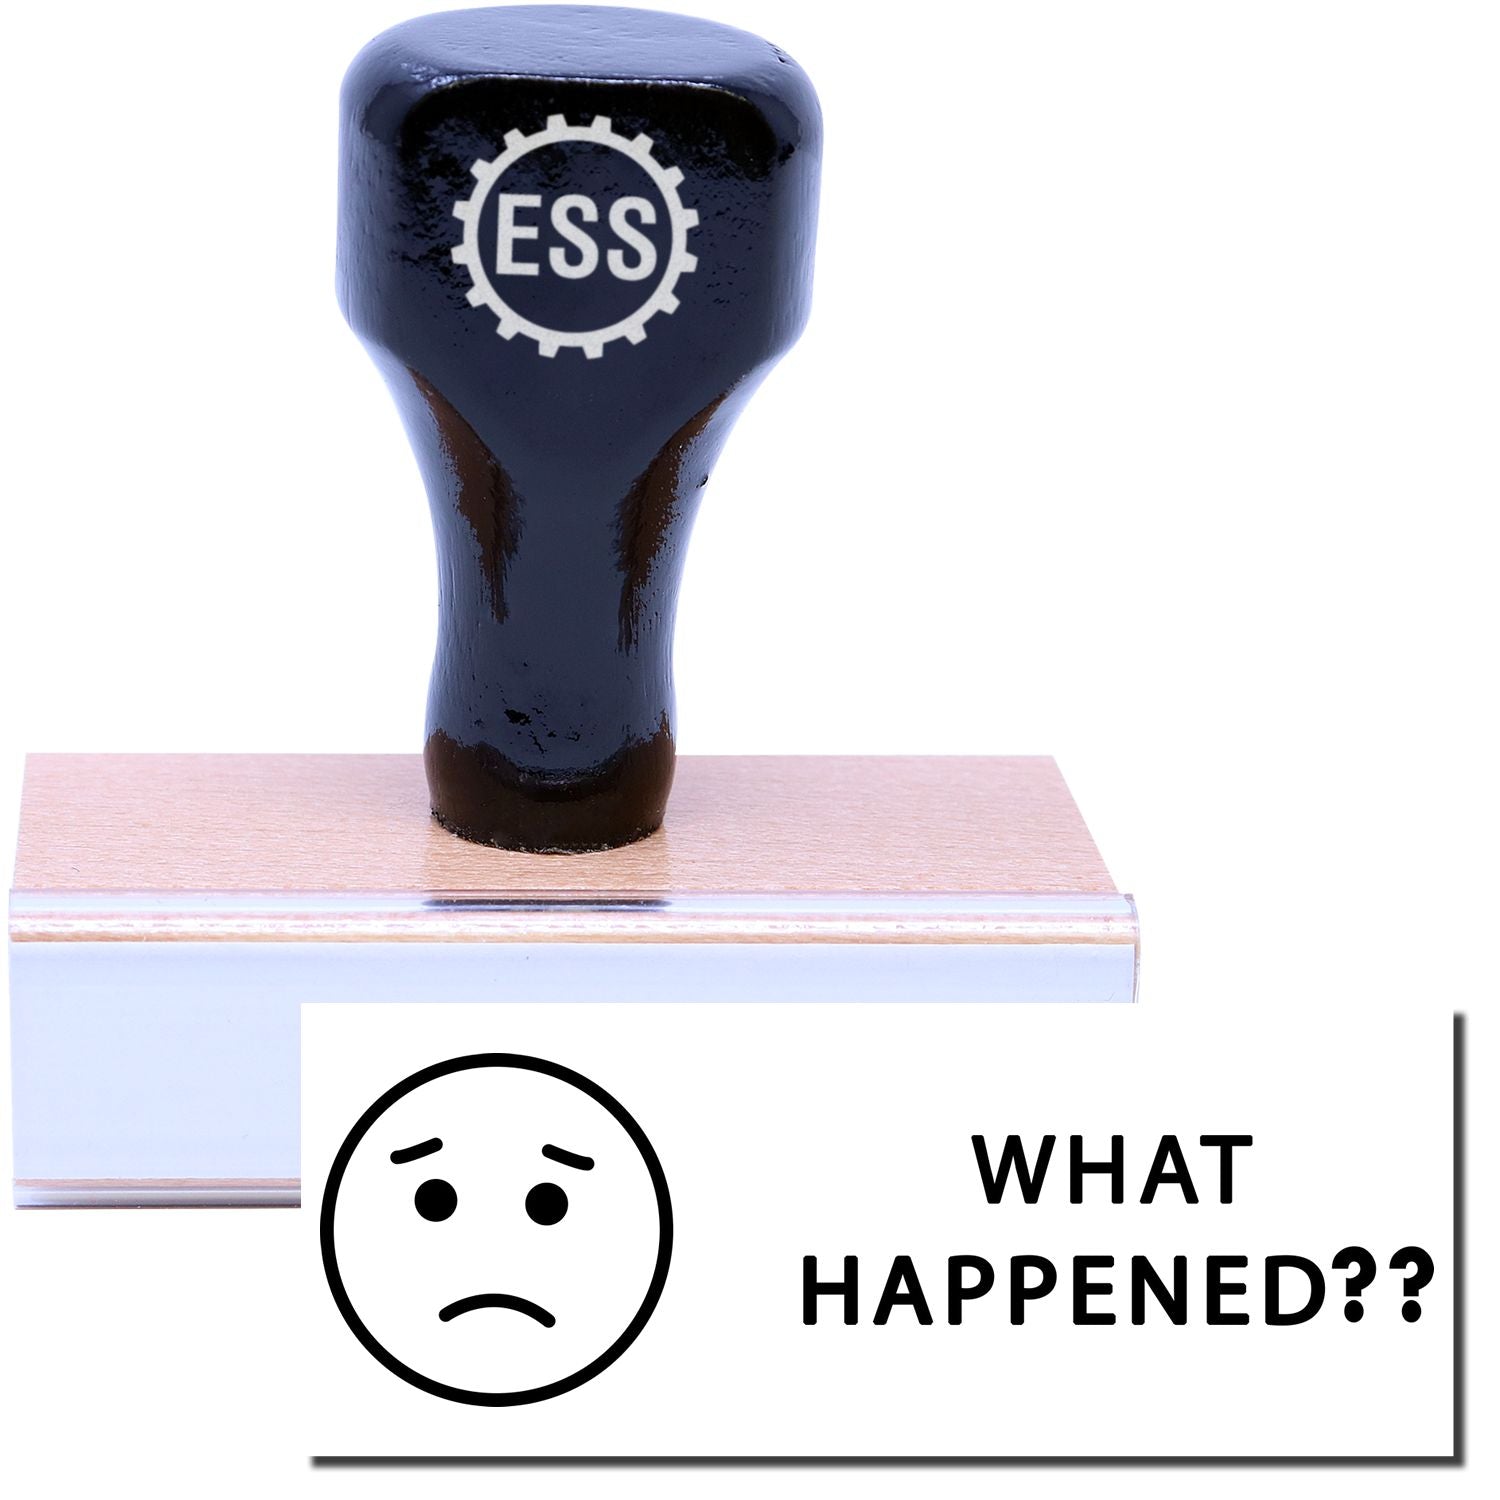 A stock office rubber stamp with a stamped image showing how the text "WHAT HAPPENED??" in a large bold font with an image of a sad face emoji on the left side is displayed after stamping.